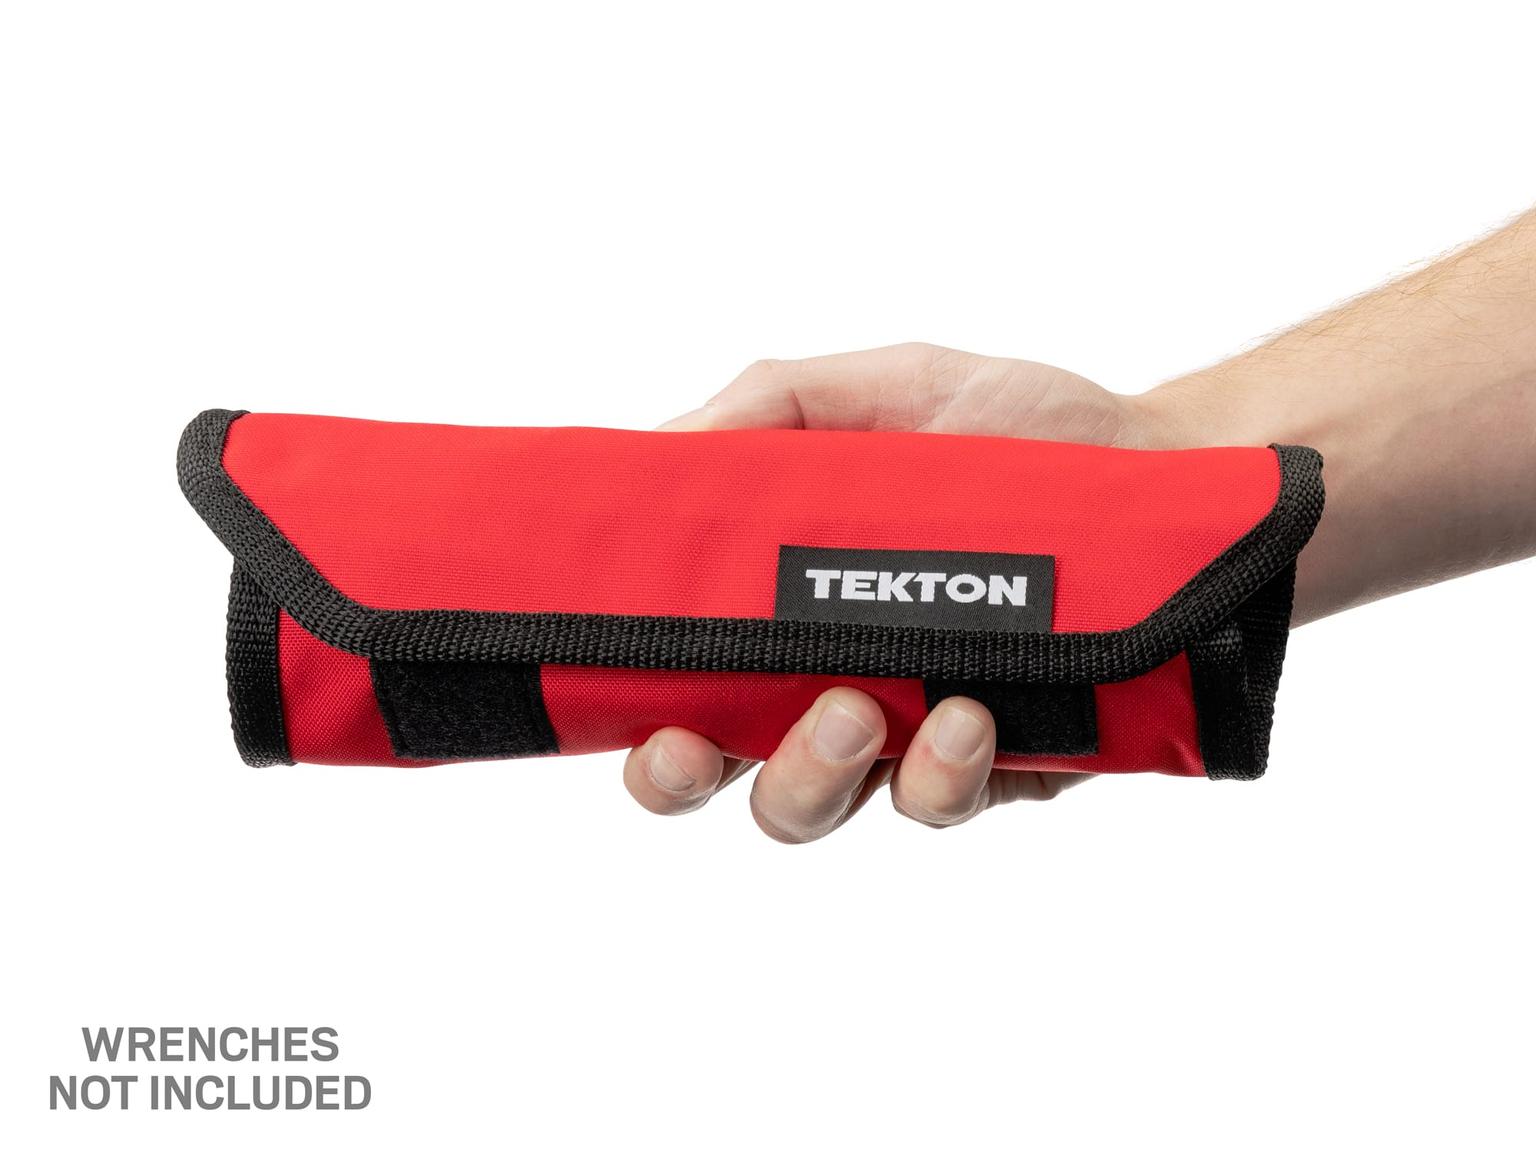 TEKTON OTP21201-T 12-Tool Angle Head Wrench Pouch (Red, 8 - 19 mm)